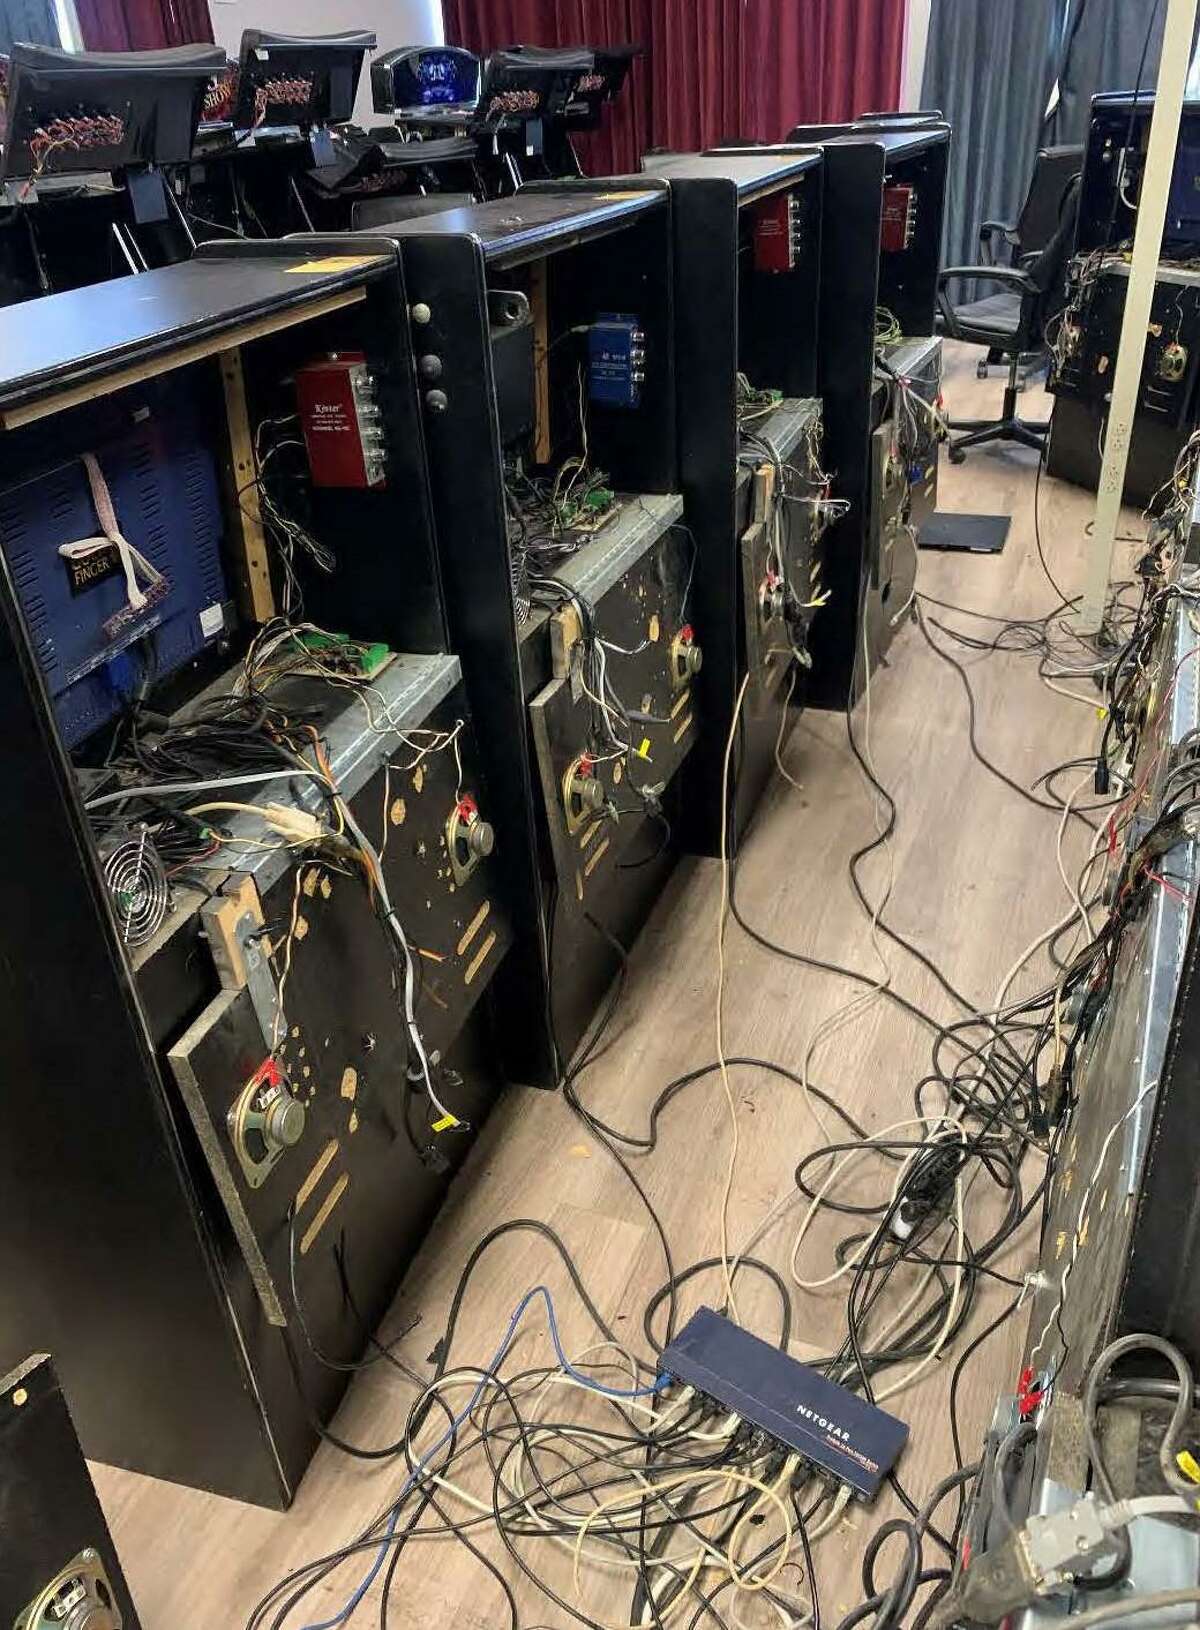 South Carolina businessman Jimmy Martin alleges in a lawsuit the San Antonio Police Department broke eight liner gaming machines’ casings and cut their wires in January at his Silver Bell parlor at 4133 Naco Perrin Blvd. He’s accused of running an illegal gambling establishment, a charge he disputes.